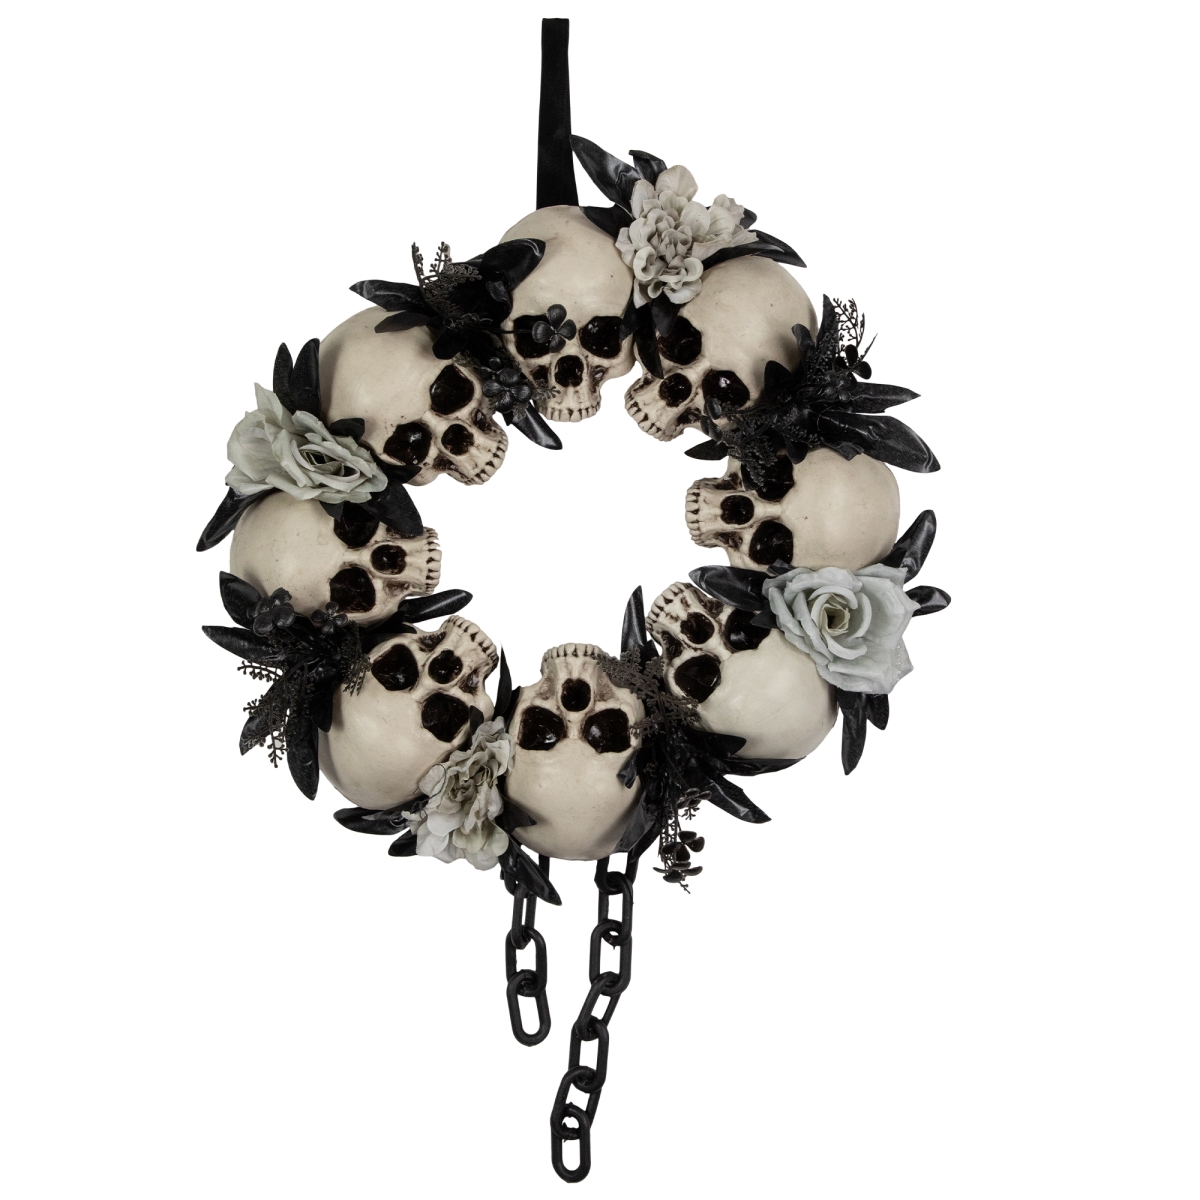 Picture of Northlight 35131180 15 in. Skulls & Chains with Gray Roses Halloween Wreath